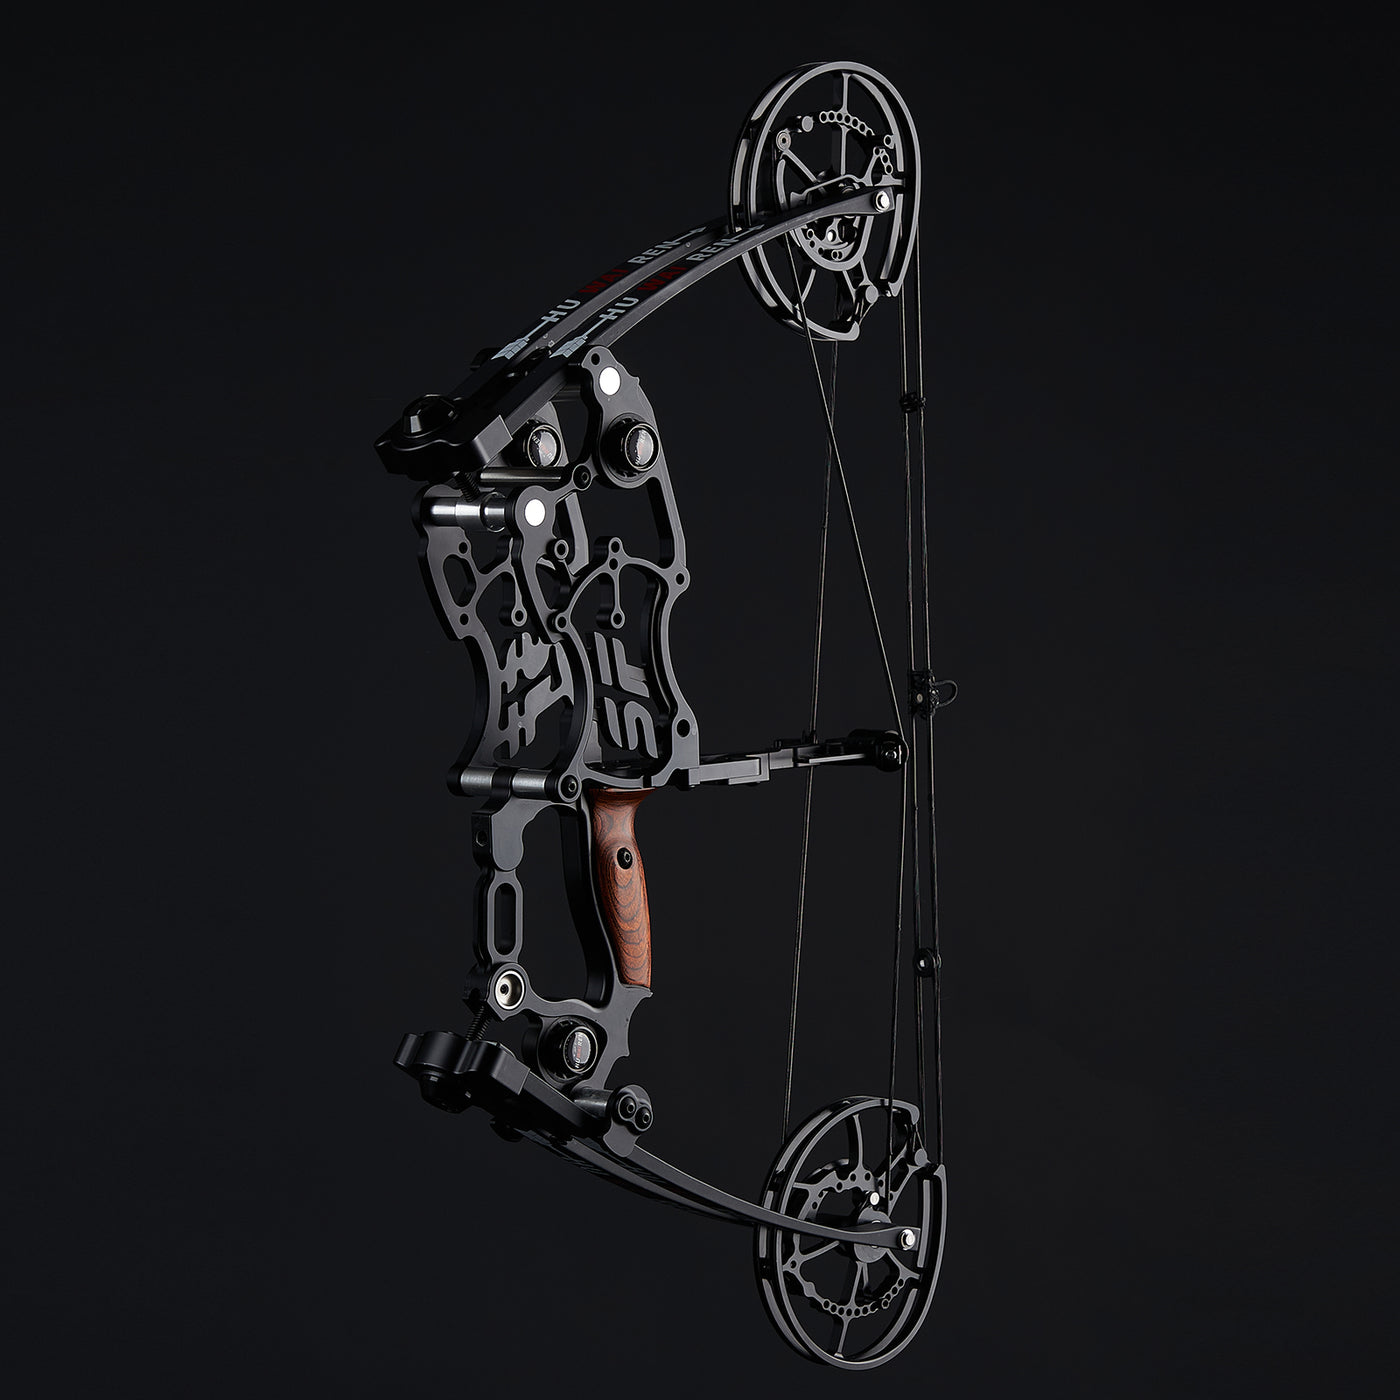 SF Compound Bow for Target Hunting Disassembled